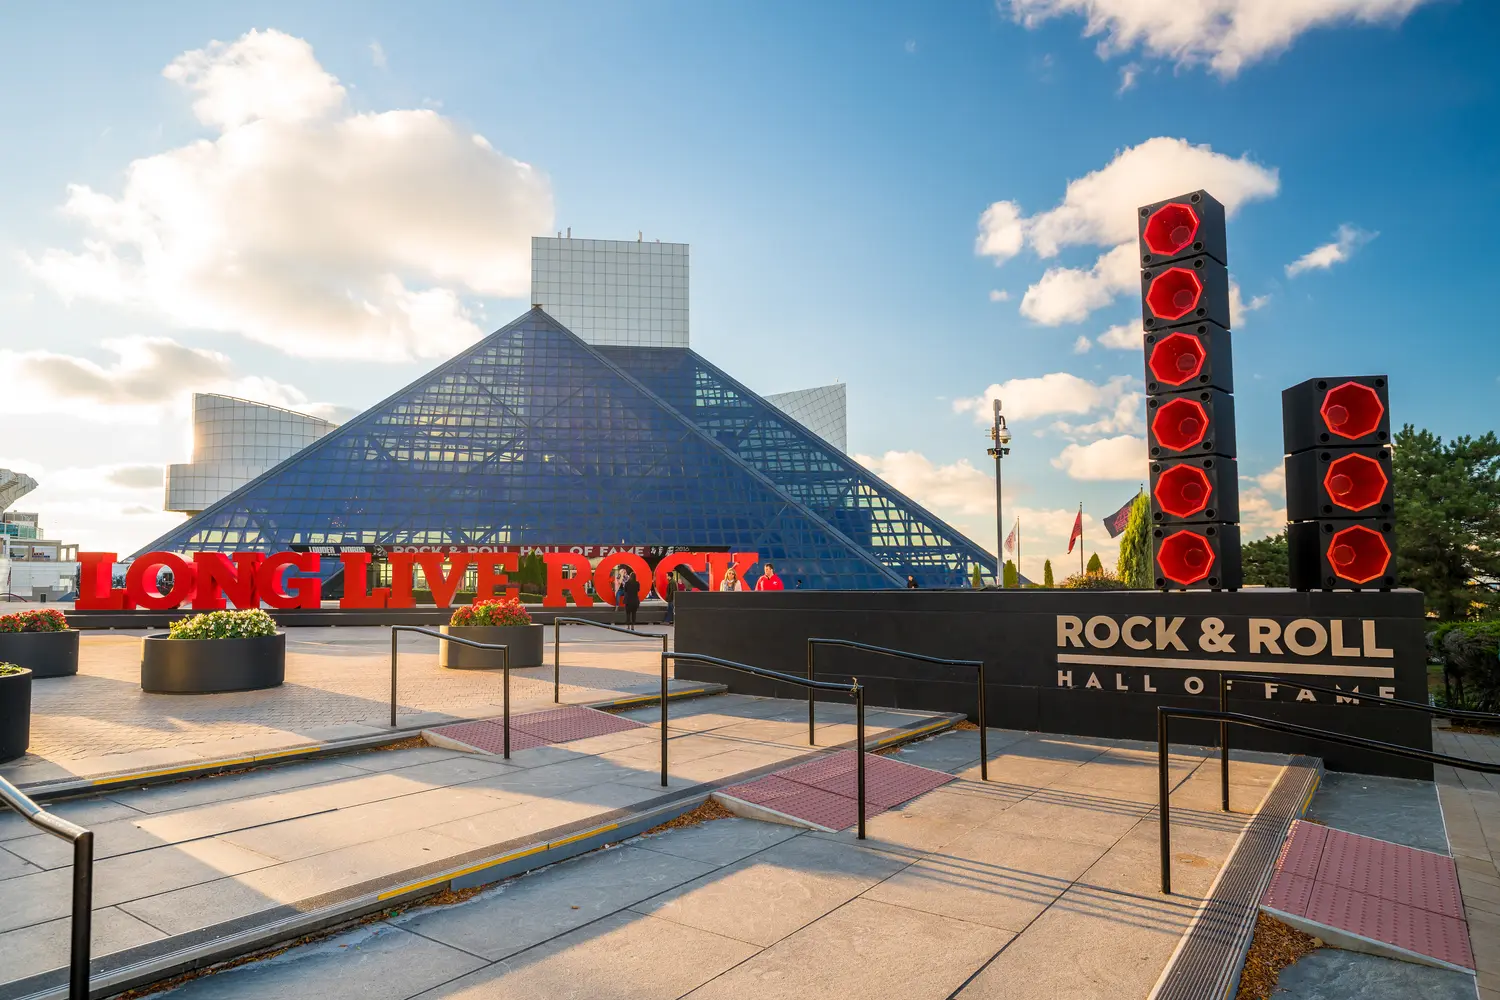 Rock & Roll Hall of Fame in Cleveland, Ohio